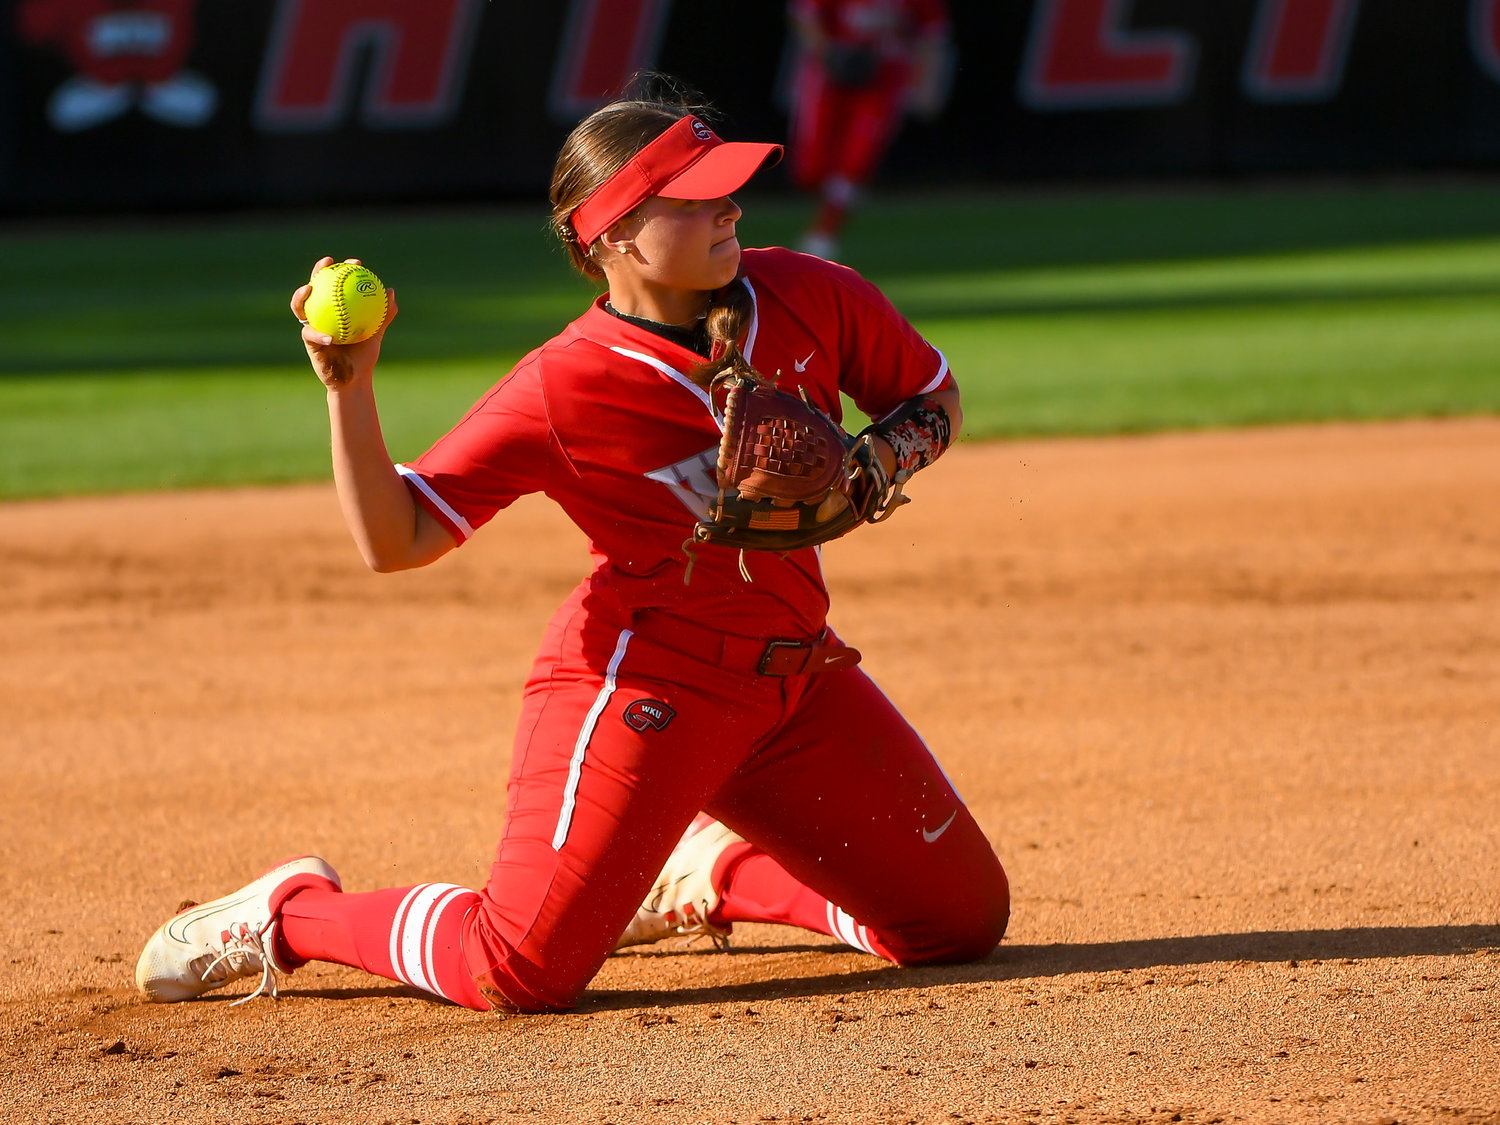 Third-baseman Taylor Sanders posted a .960 fielding percentage for the
Hilltoppers this past season.